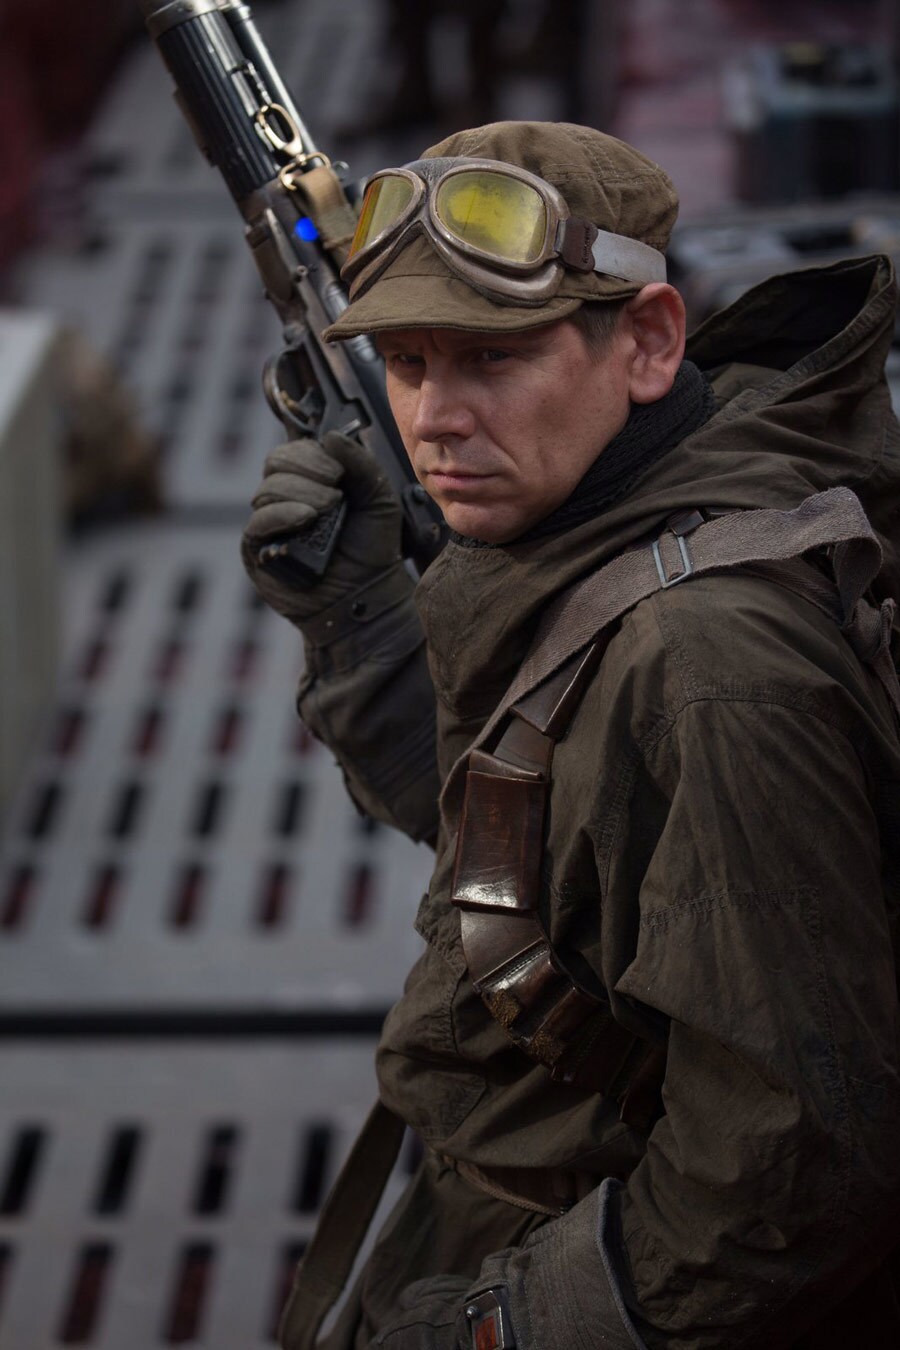 Puppeteer and actor Brian Herring brandishes a blaster pistol while playing a Resistance Soldier in The Last Jedi.